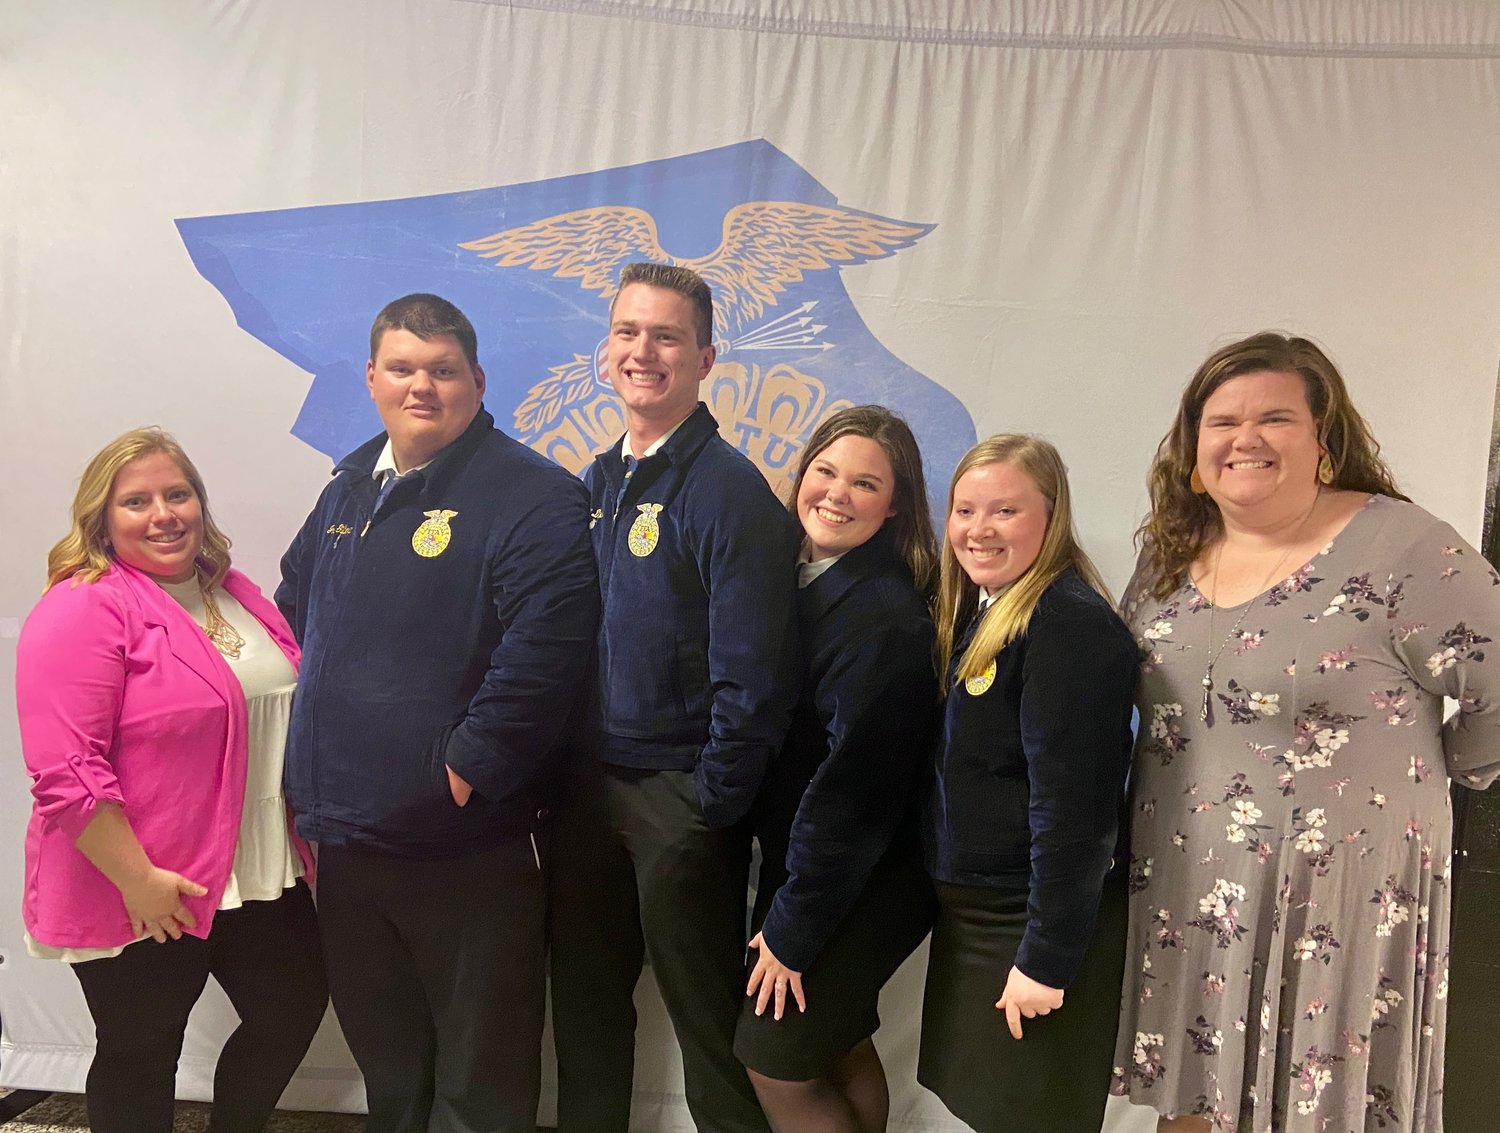 The Montgomery County FFA chapter visited the FFA State Convention on April 21-22 in Columbia. Pictured are, from left, co-adviser Amanda Sullivan, seniors Josh Gilbert, Chadley Davis, Izzy Freymuth and Heather Stille and co-adviser Mary Leykamp.